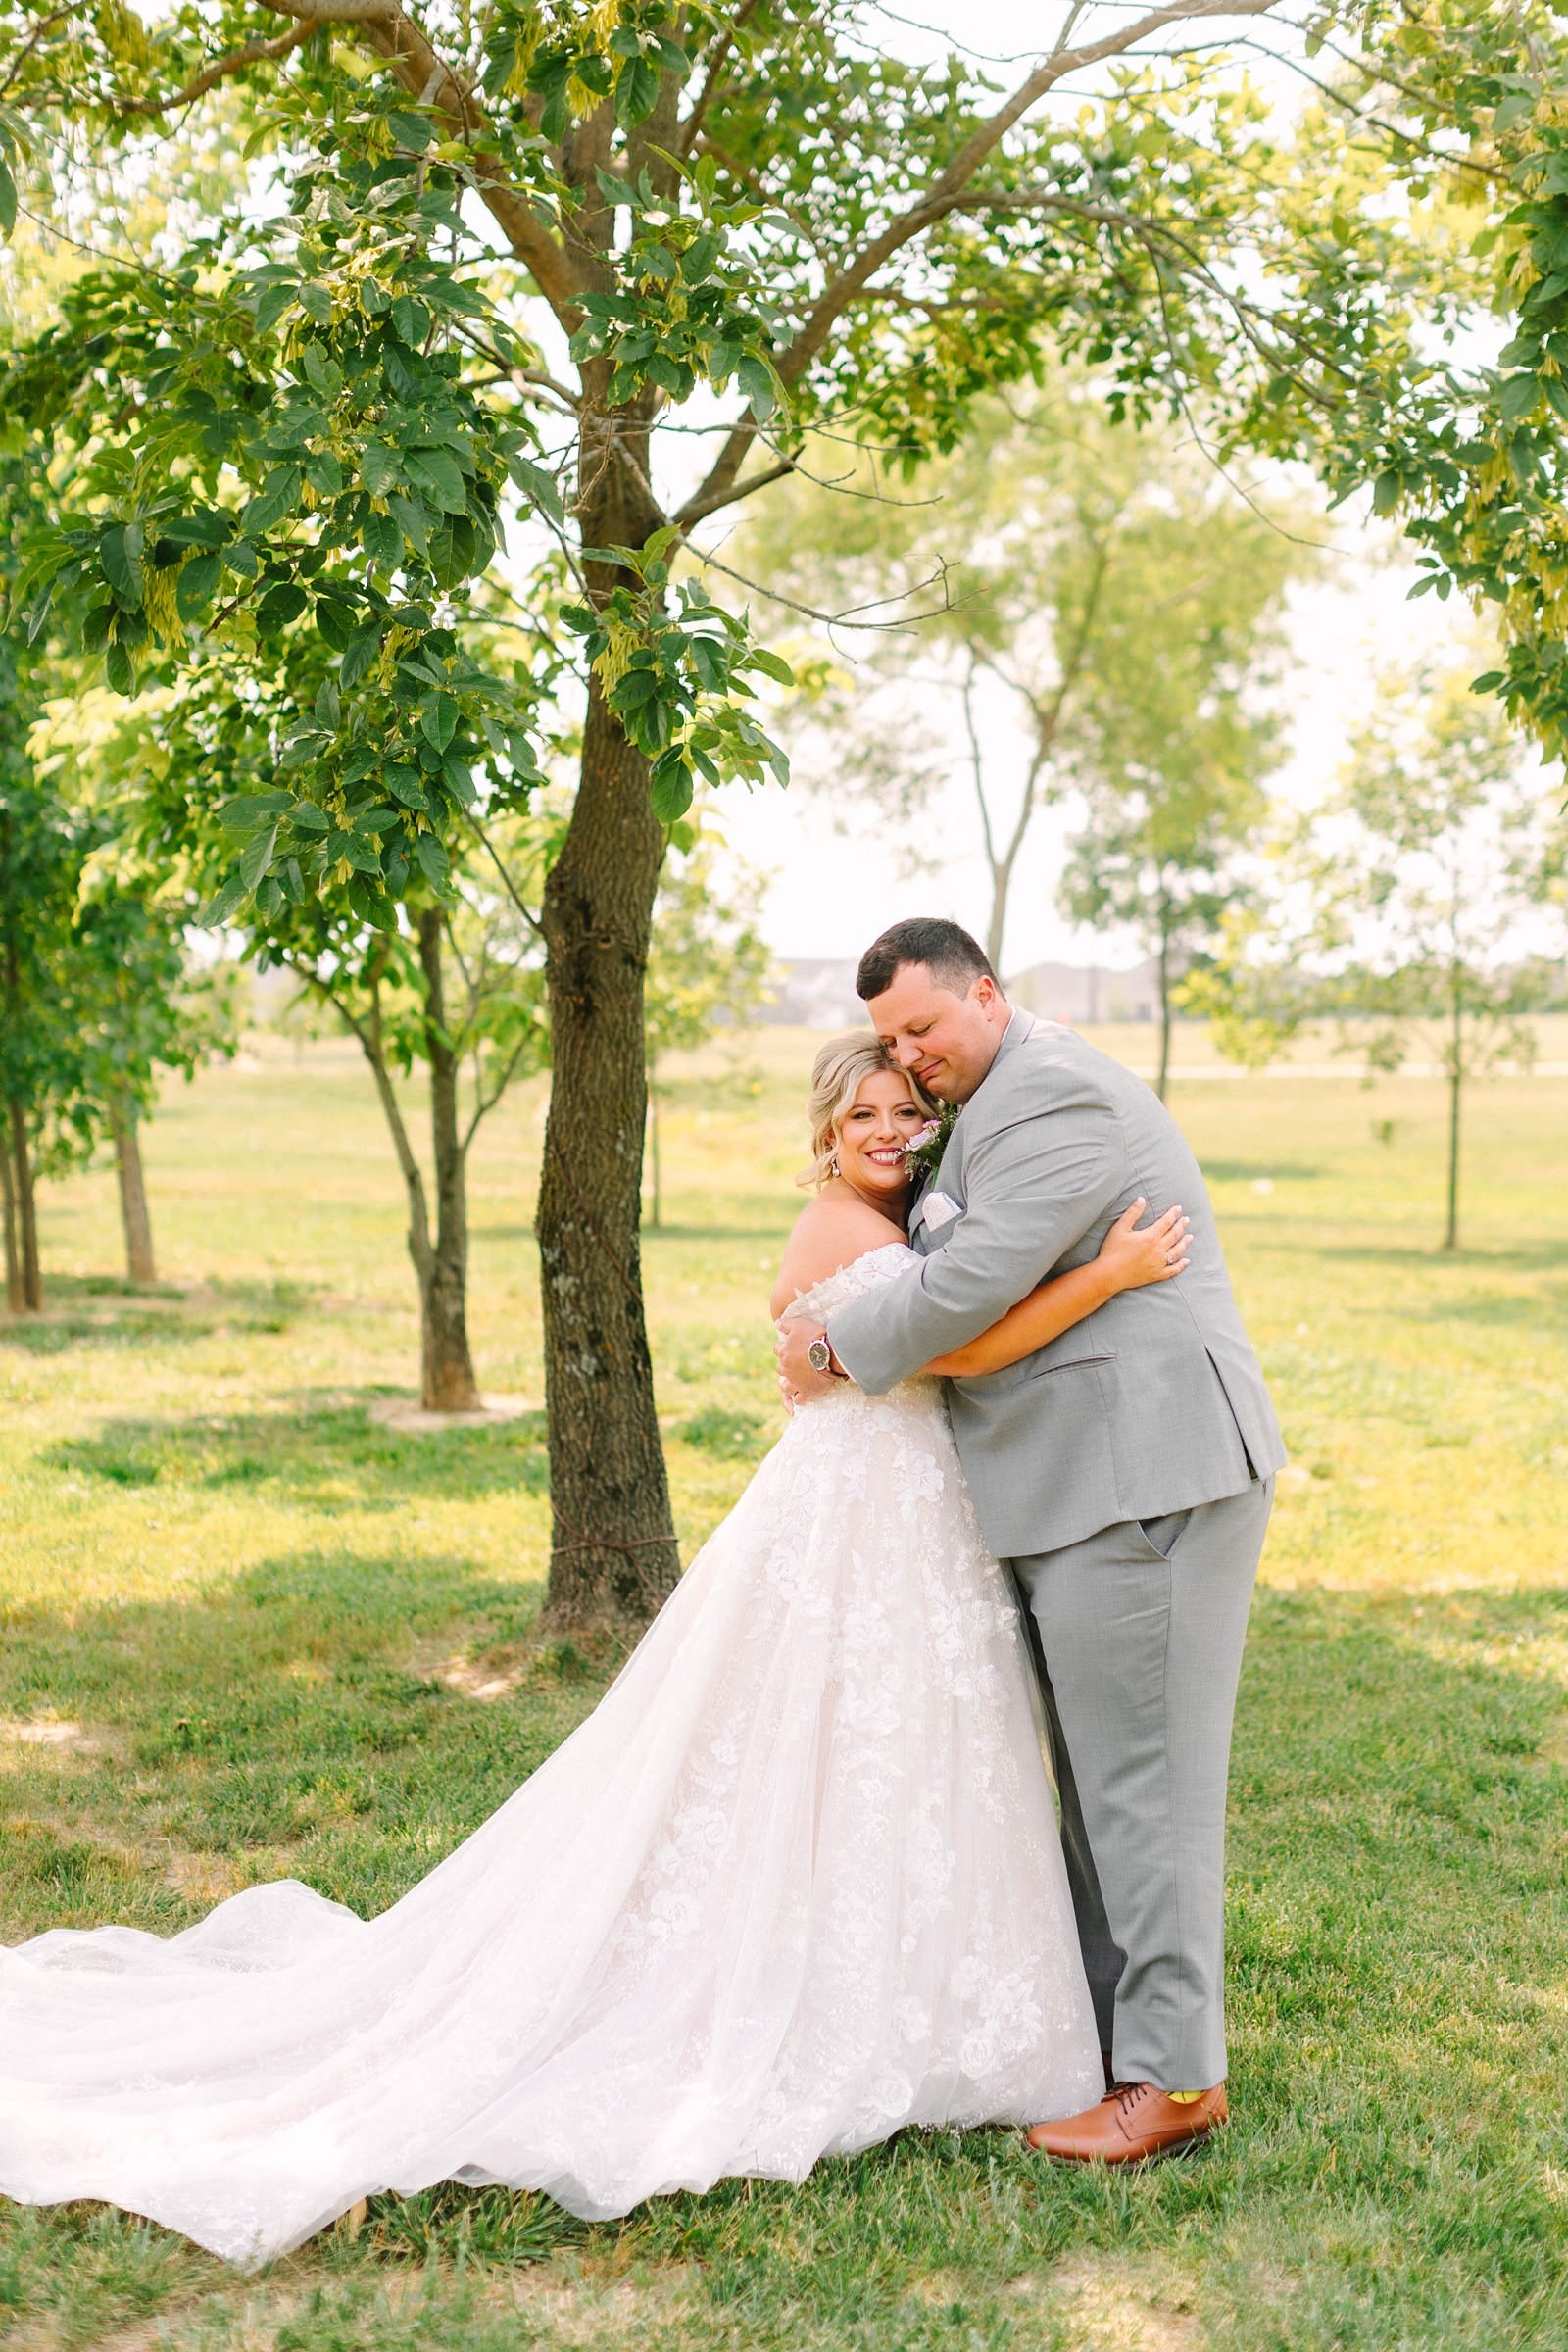 A Sunny Summer Wedding at Friedman Park in Newburgh Indiana | Paige and Dylan | Bret and Brandie Photography064.jpg